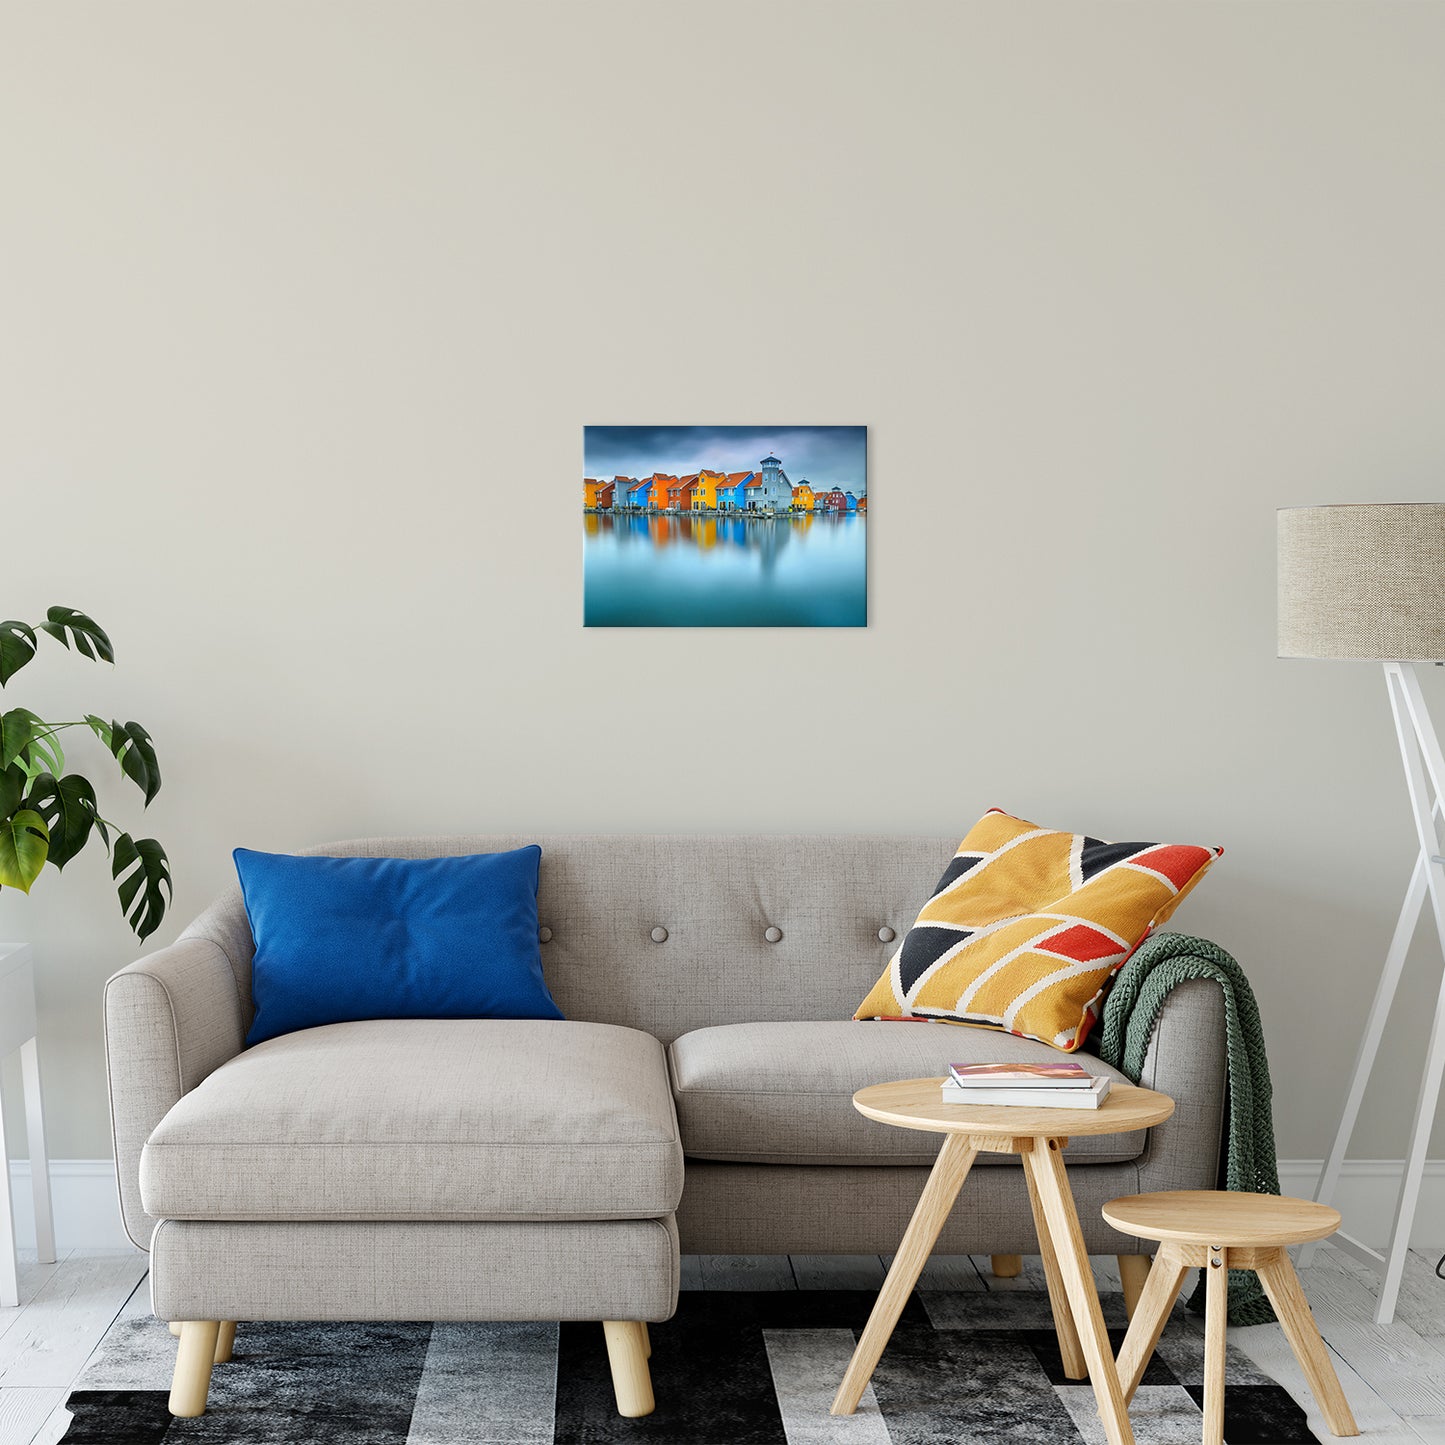 Blue Morning at Waters Edge Groningen Netherlands Europe Landscape Wall Art Canvas Prints 16" x 20" - PIPAFINEART